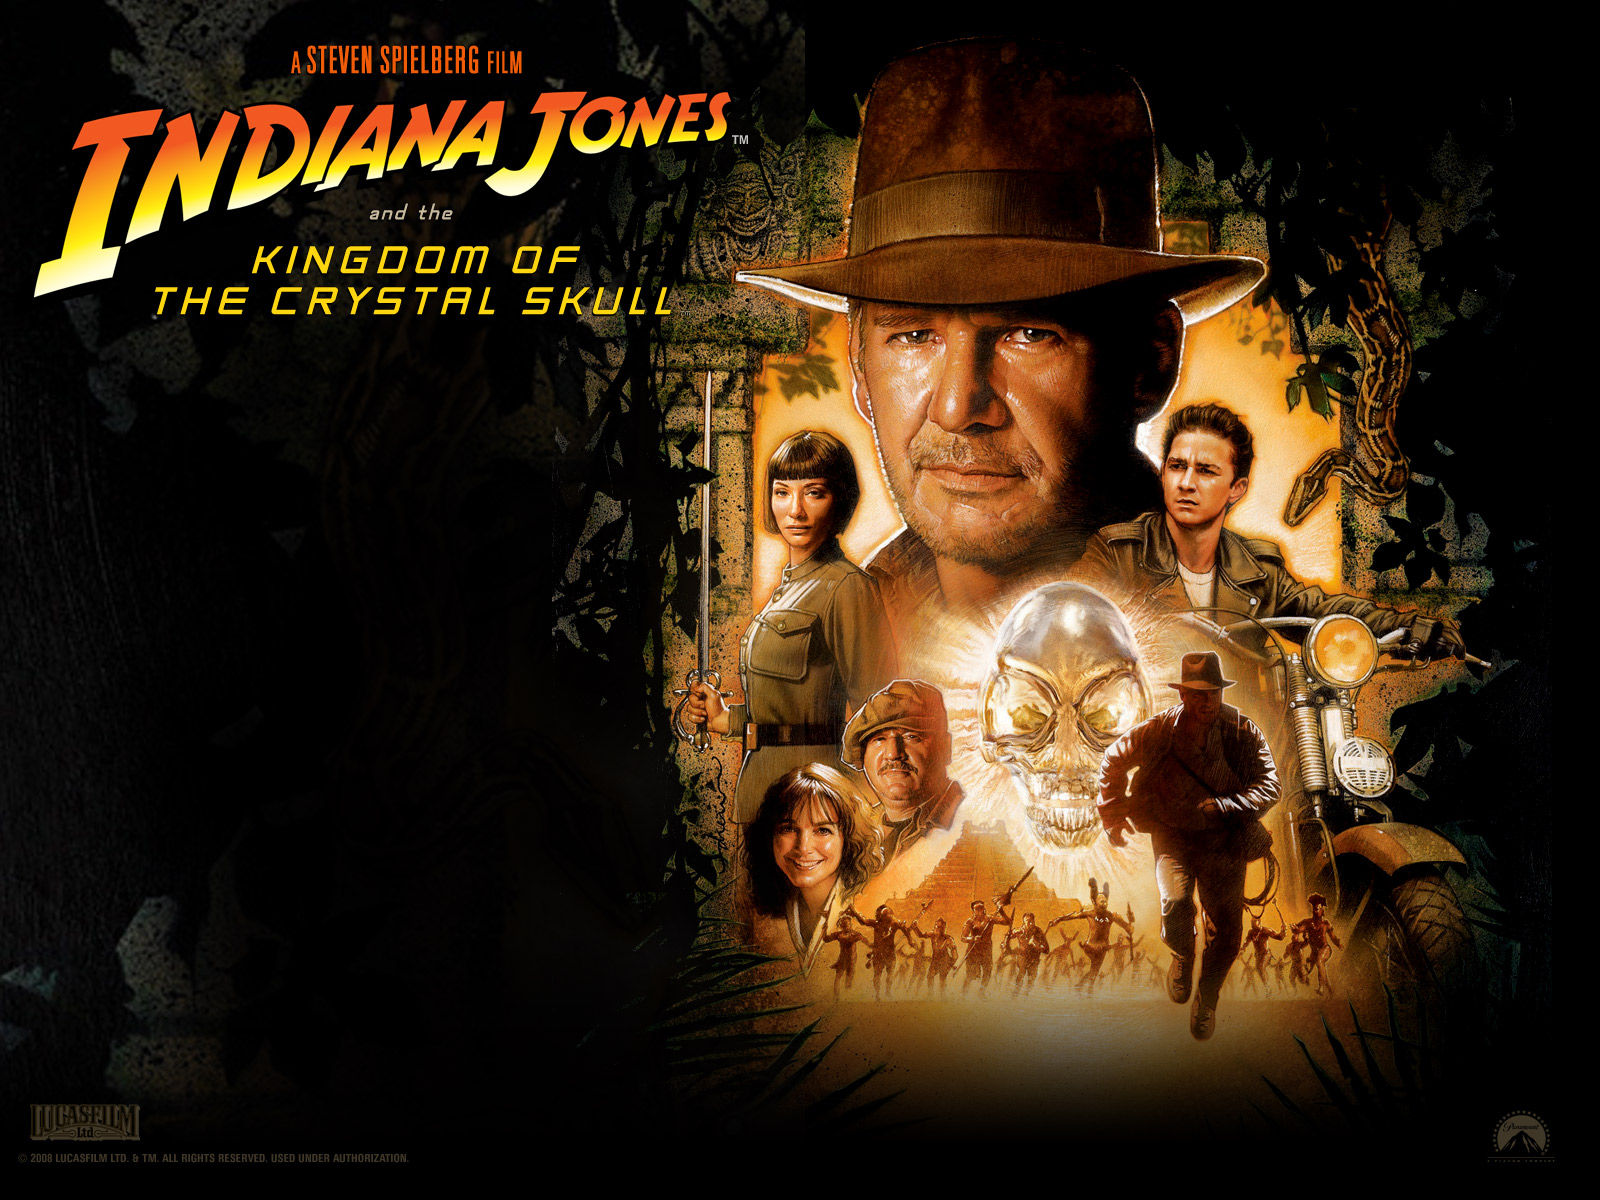 Is Disney Going to Ask Harrison Ford to Play Indiana Jones Again?. The Motley Fool